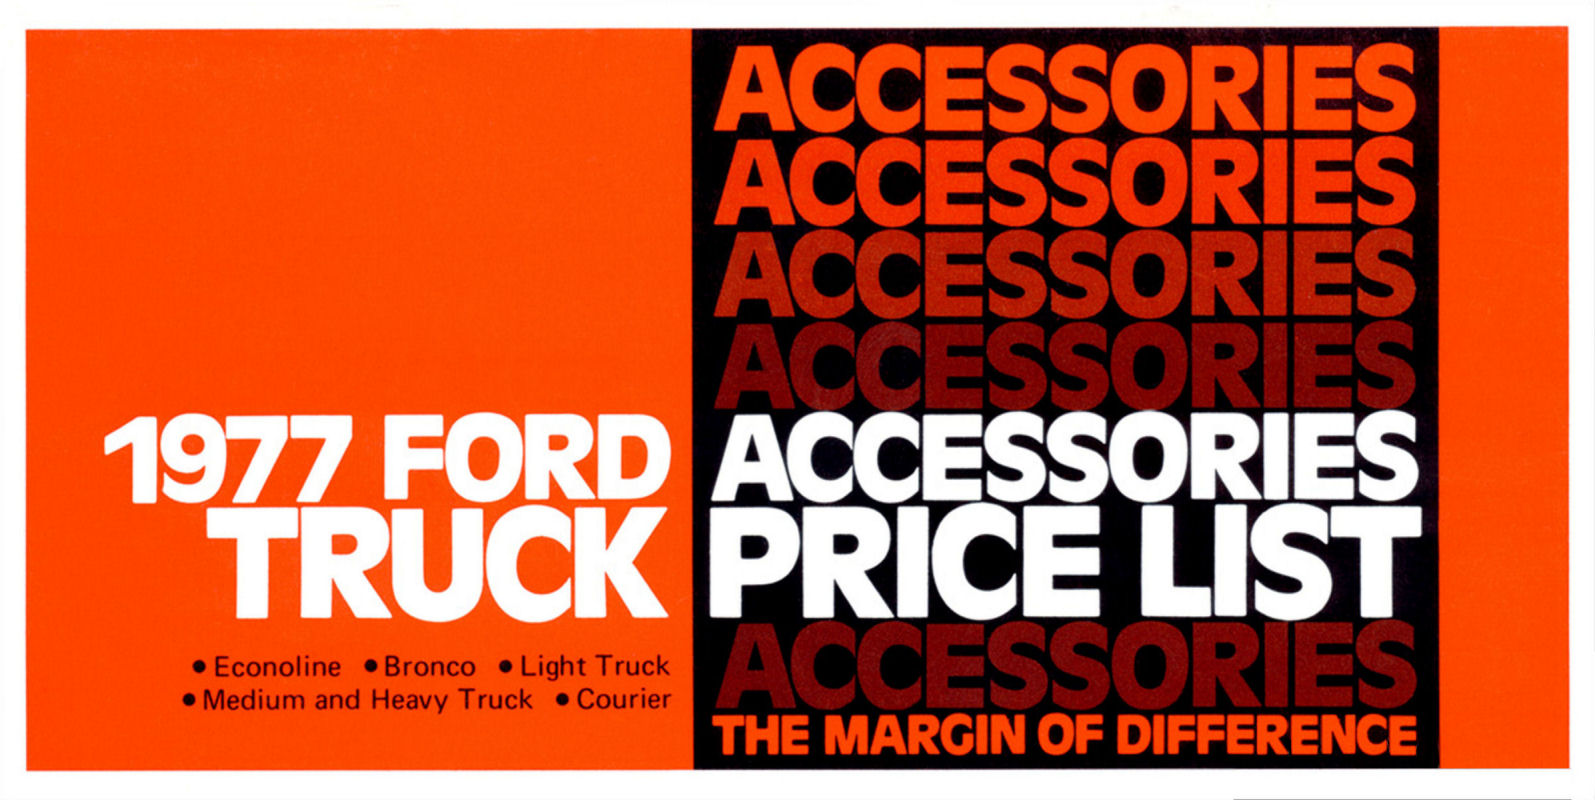 1977 Ford Truck Accessories Prices-01